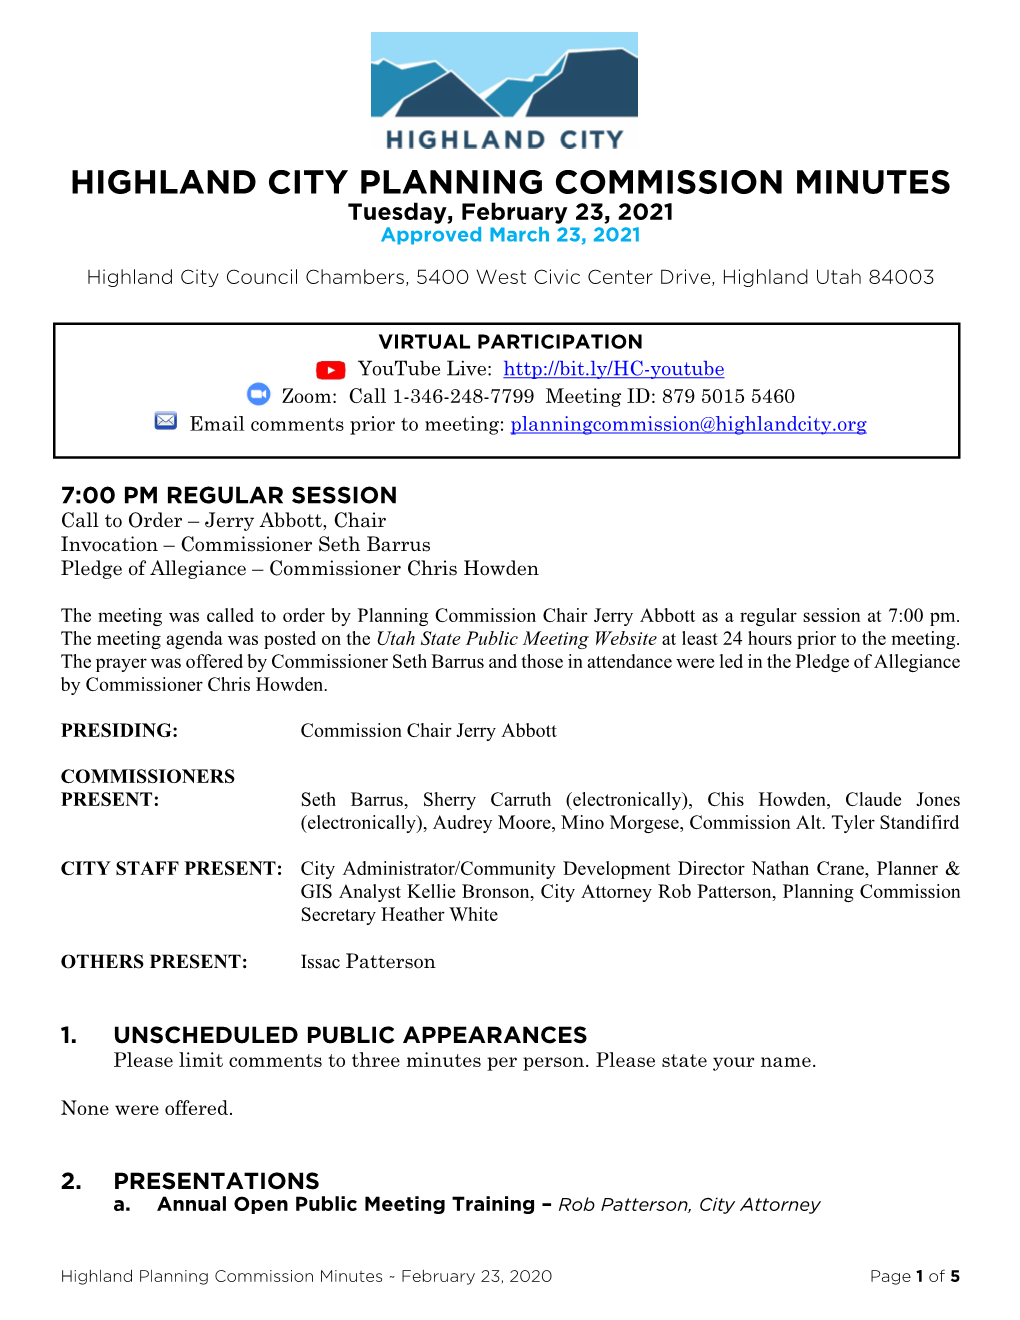 HIGHLAND CITY PLANNING COMMISSION MINUTES Tuesday, February 23, 2021 Approved March 23, 2021